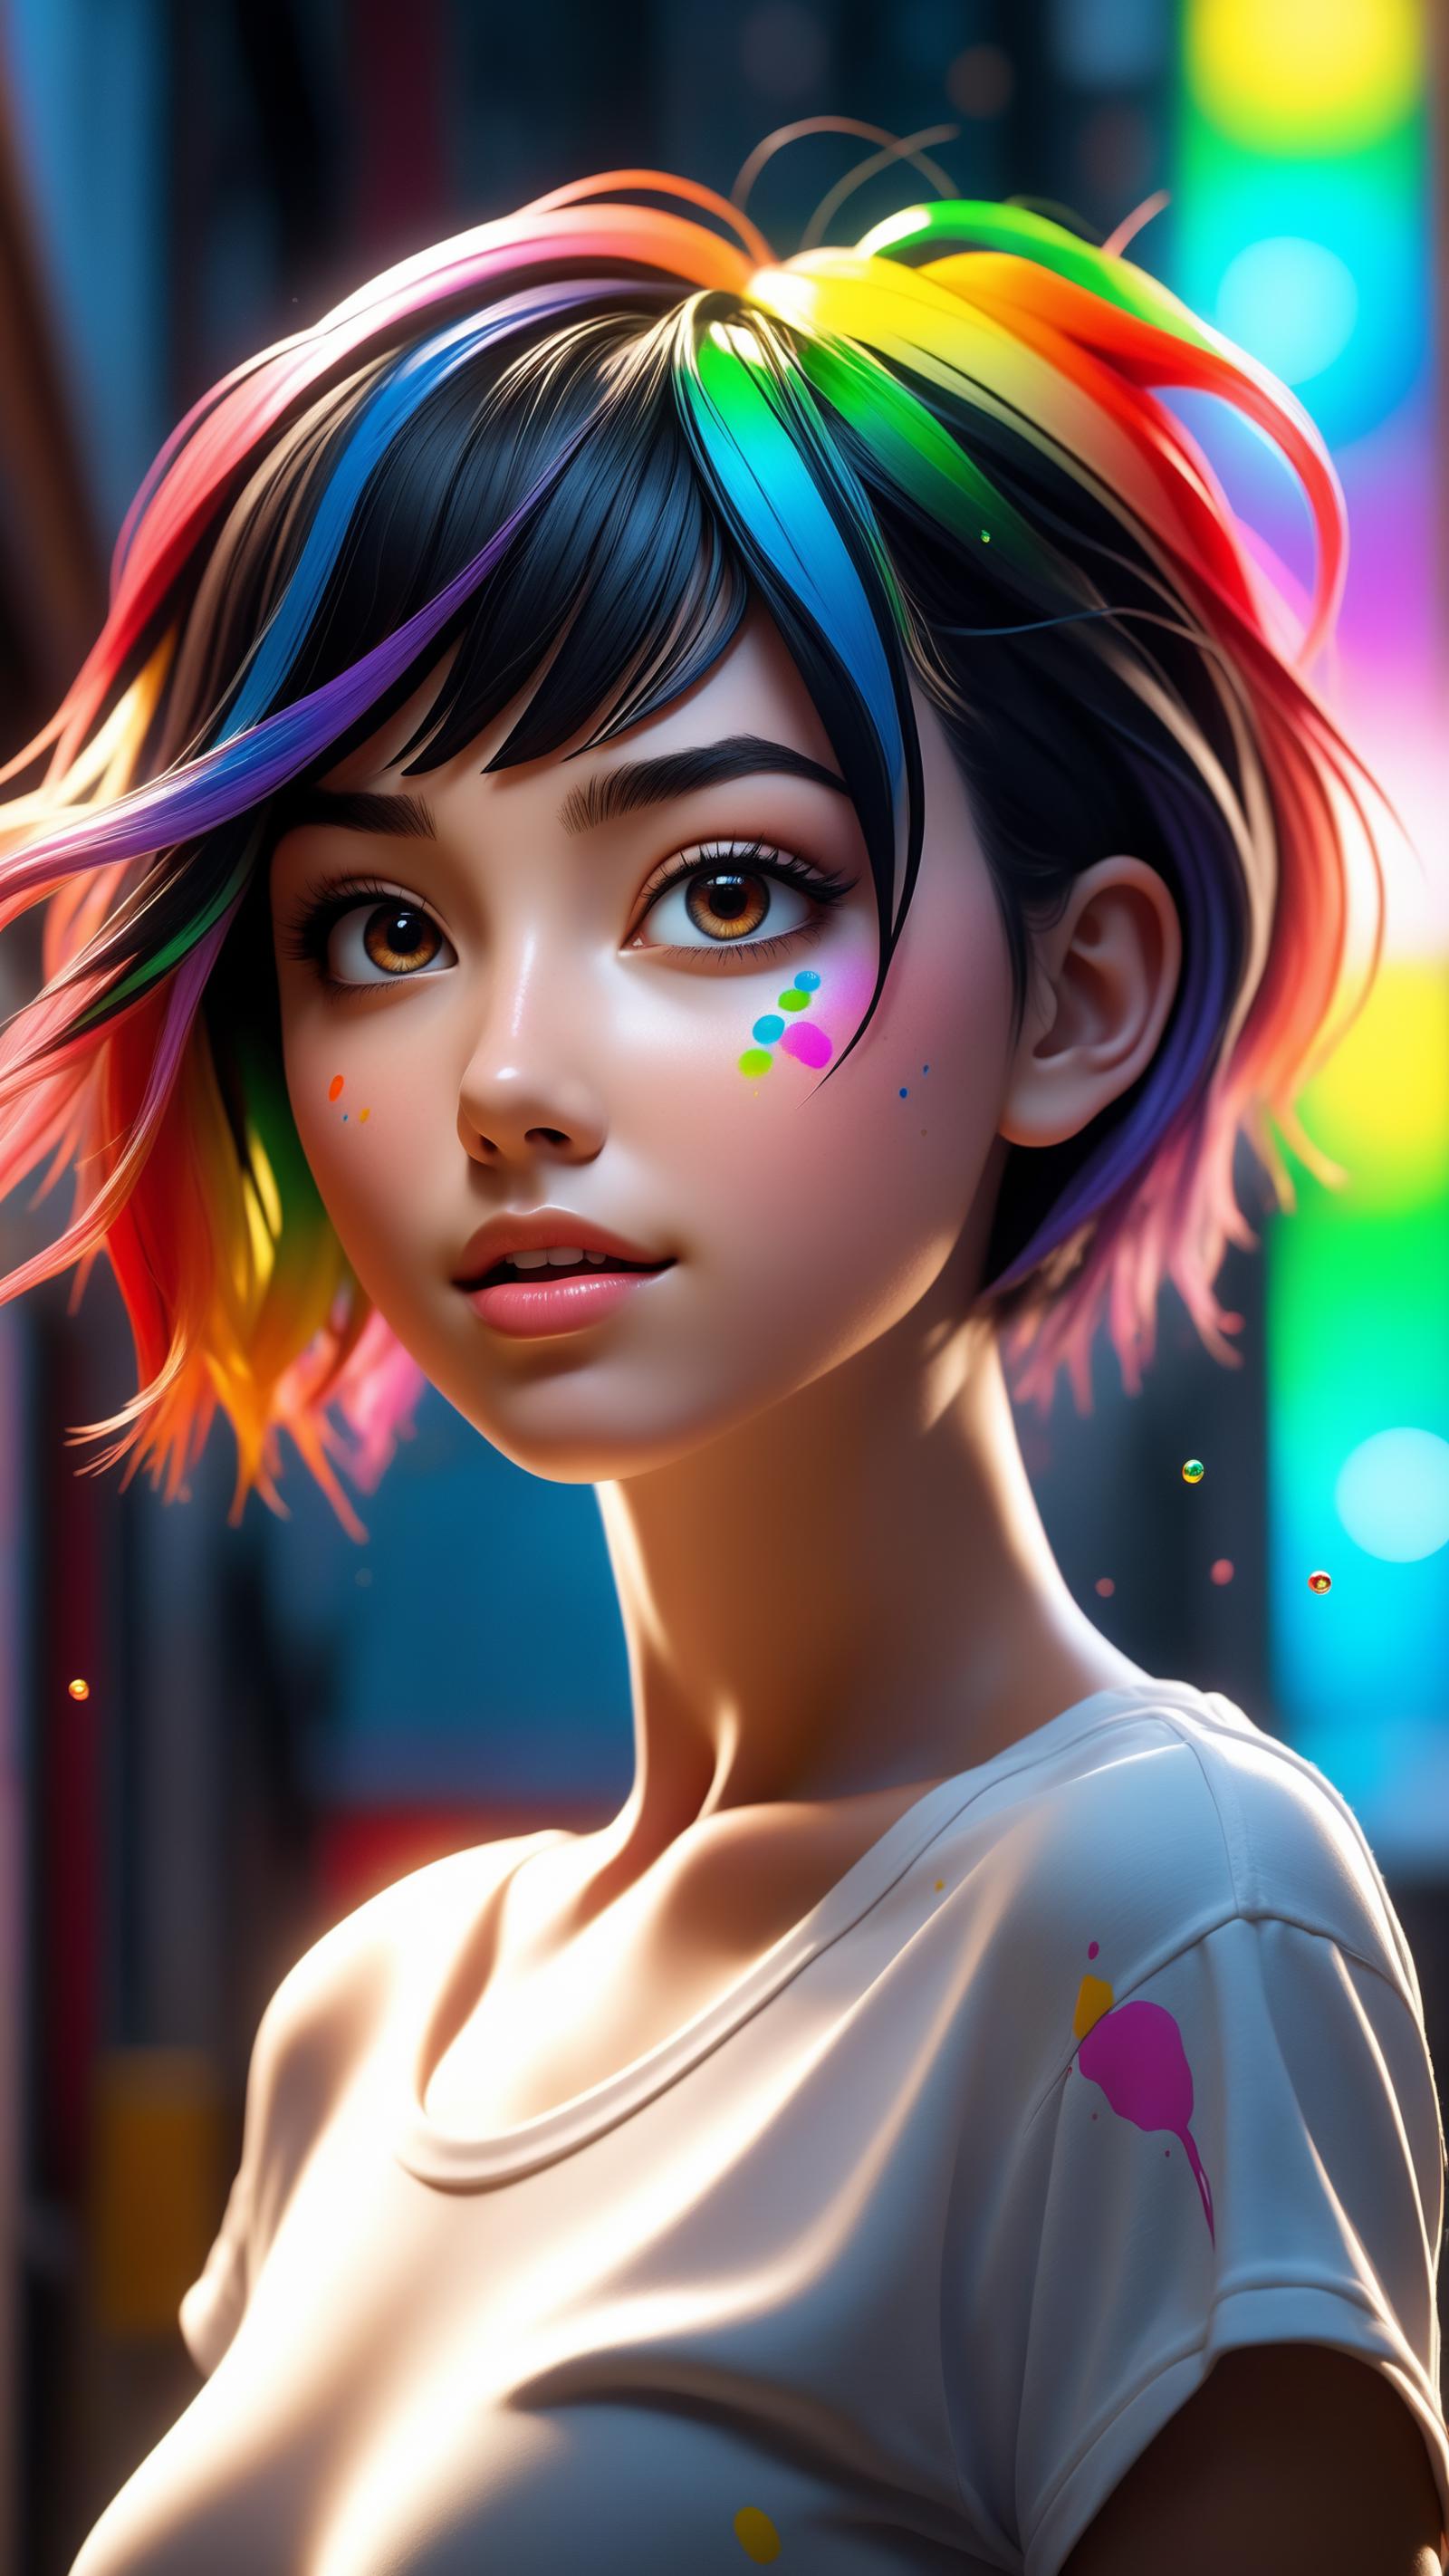 A digital art image of a woman with colorful makeup, including polka dots and painted eyes, wearing a white shirt and a headband.